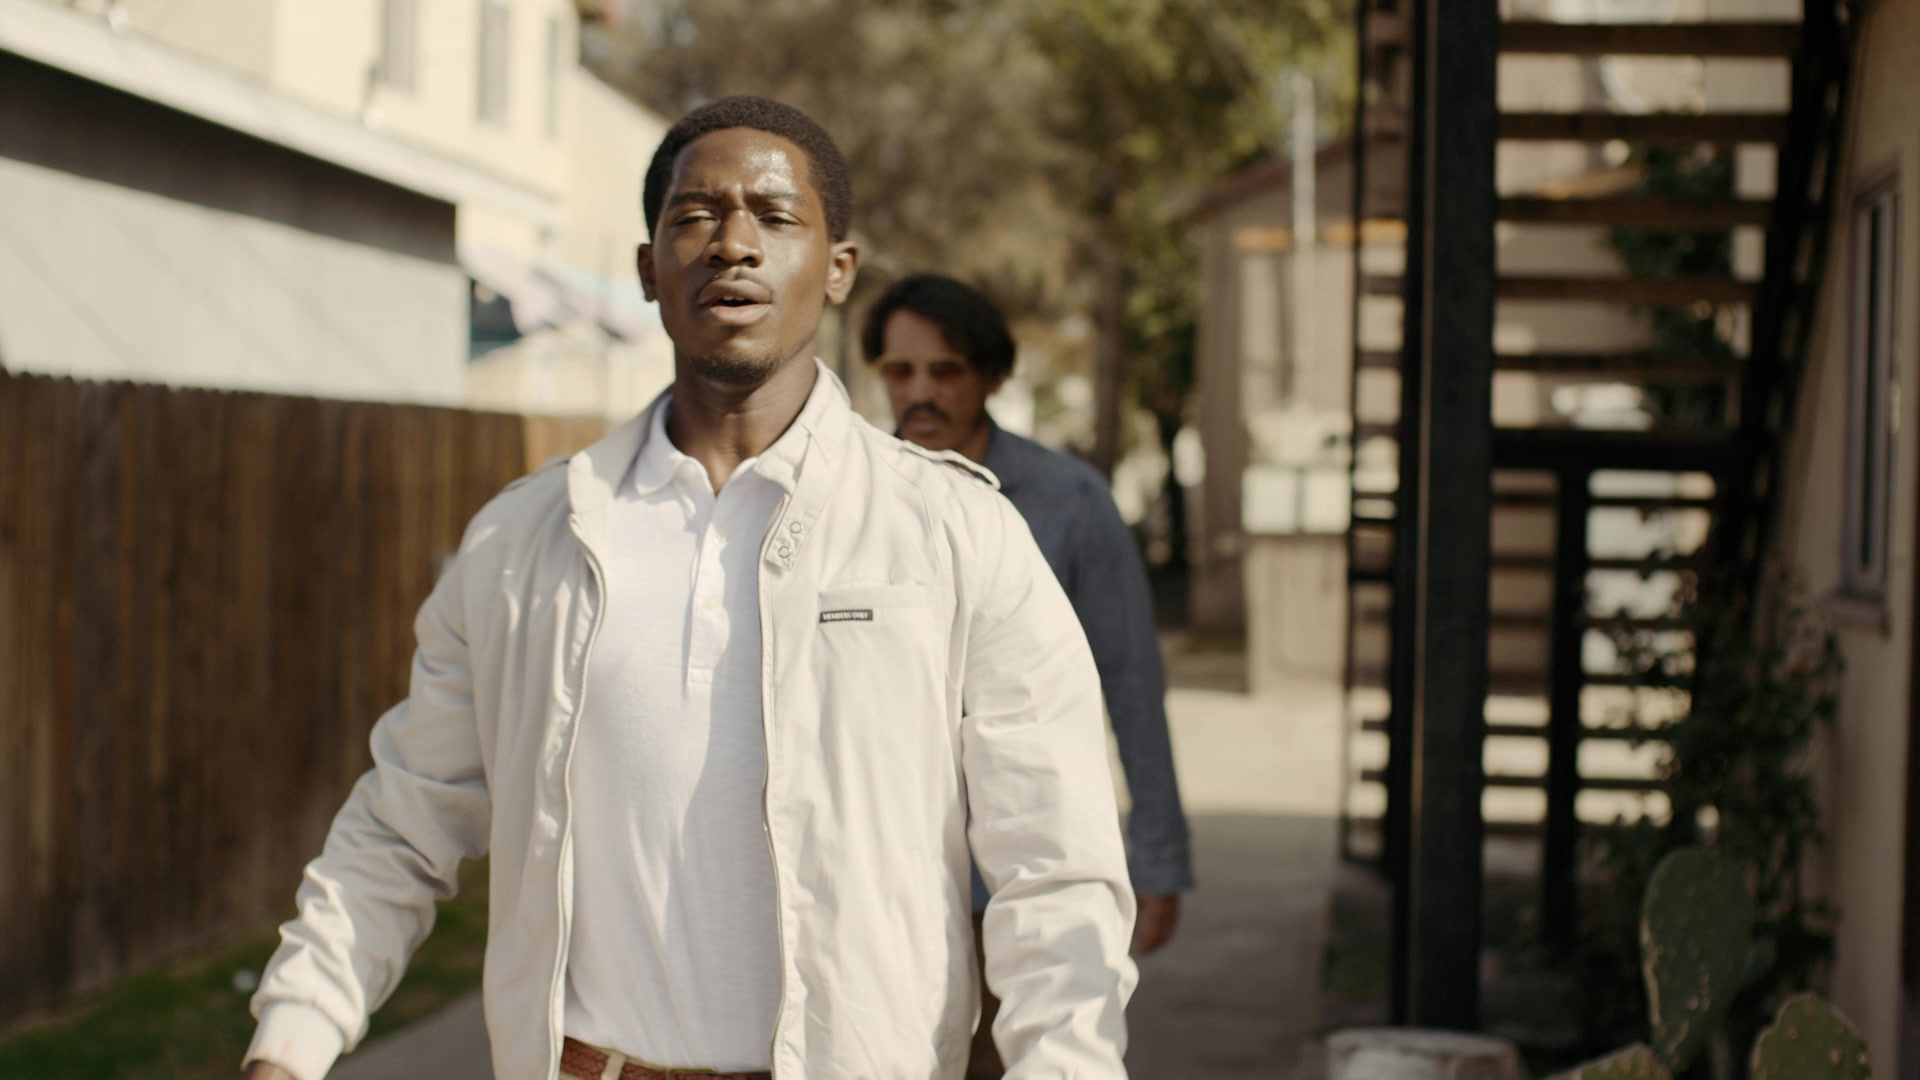 Members Only Jacket Of Damson Idris As Franklin Saint In Snowfall S05e05 The Iliad Part 1 2022